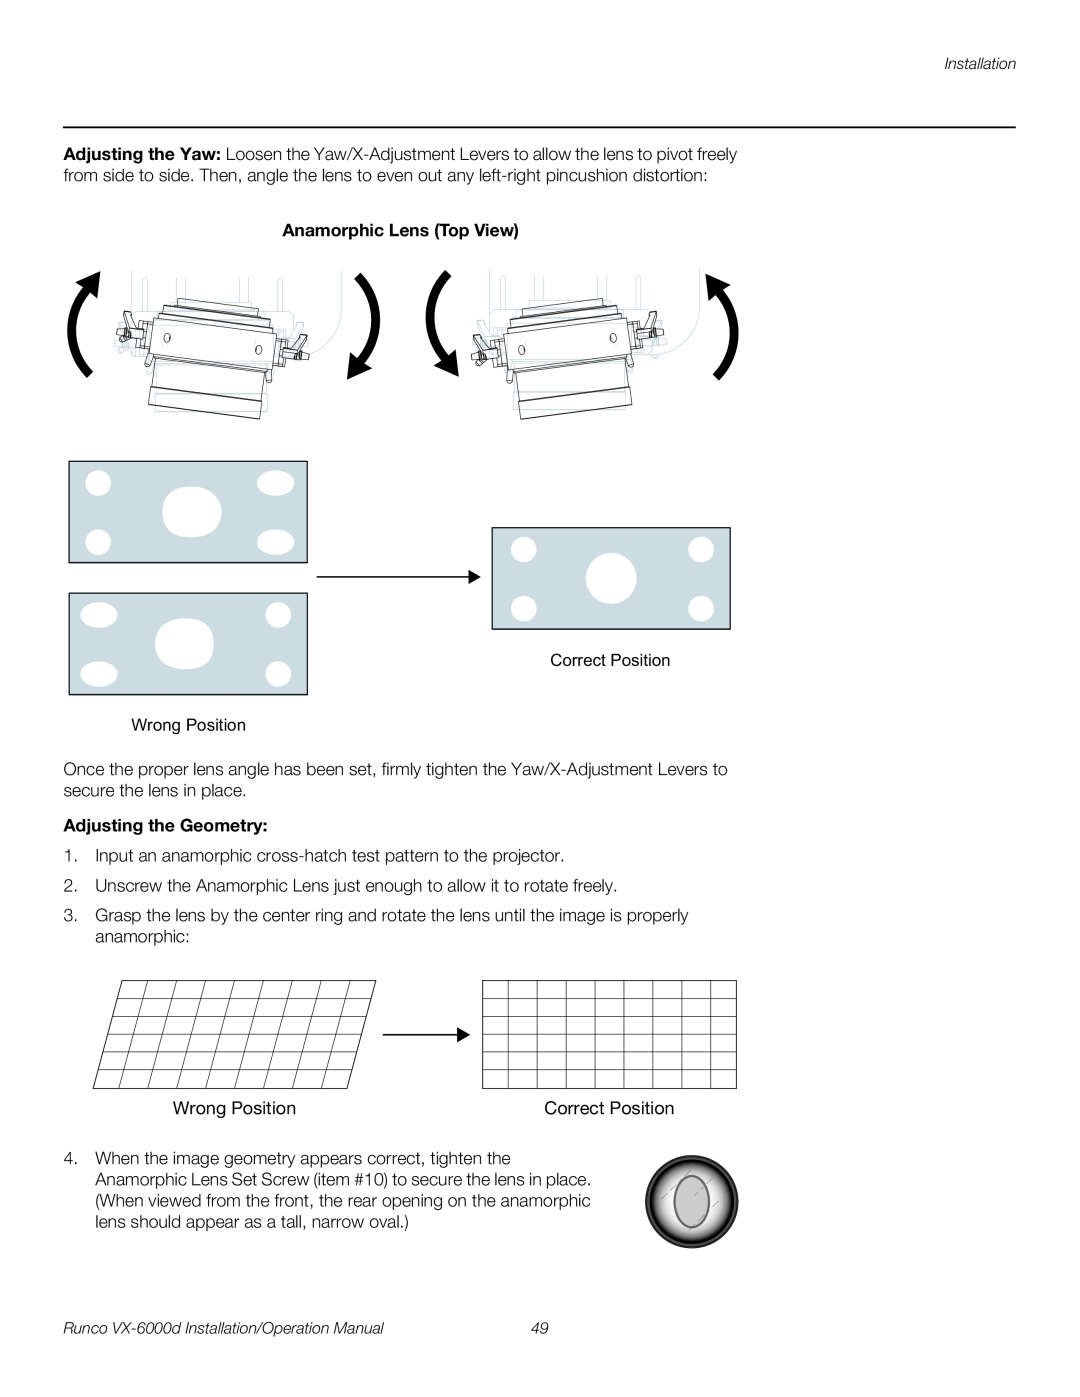 Runco VX-6000D operation manual Wrong Position, Anamorphic Lens Top View, Adjusting the Geometry 